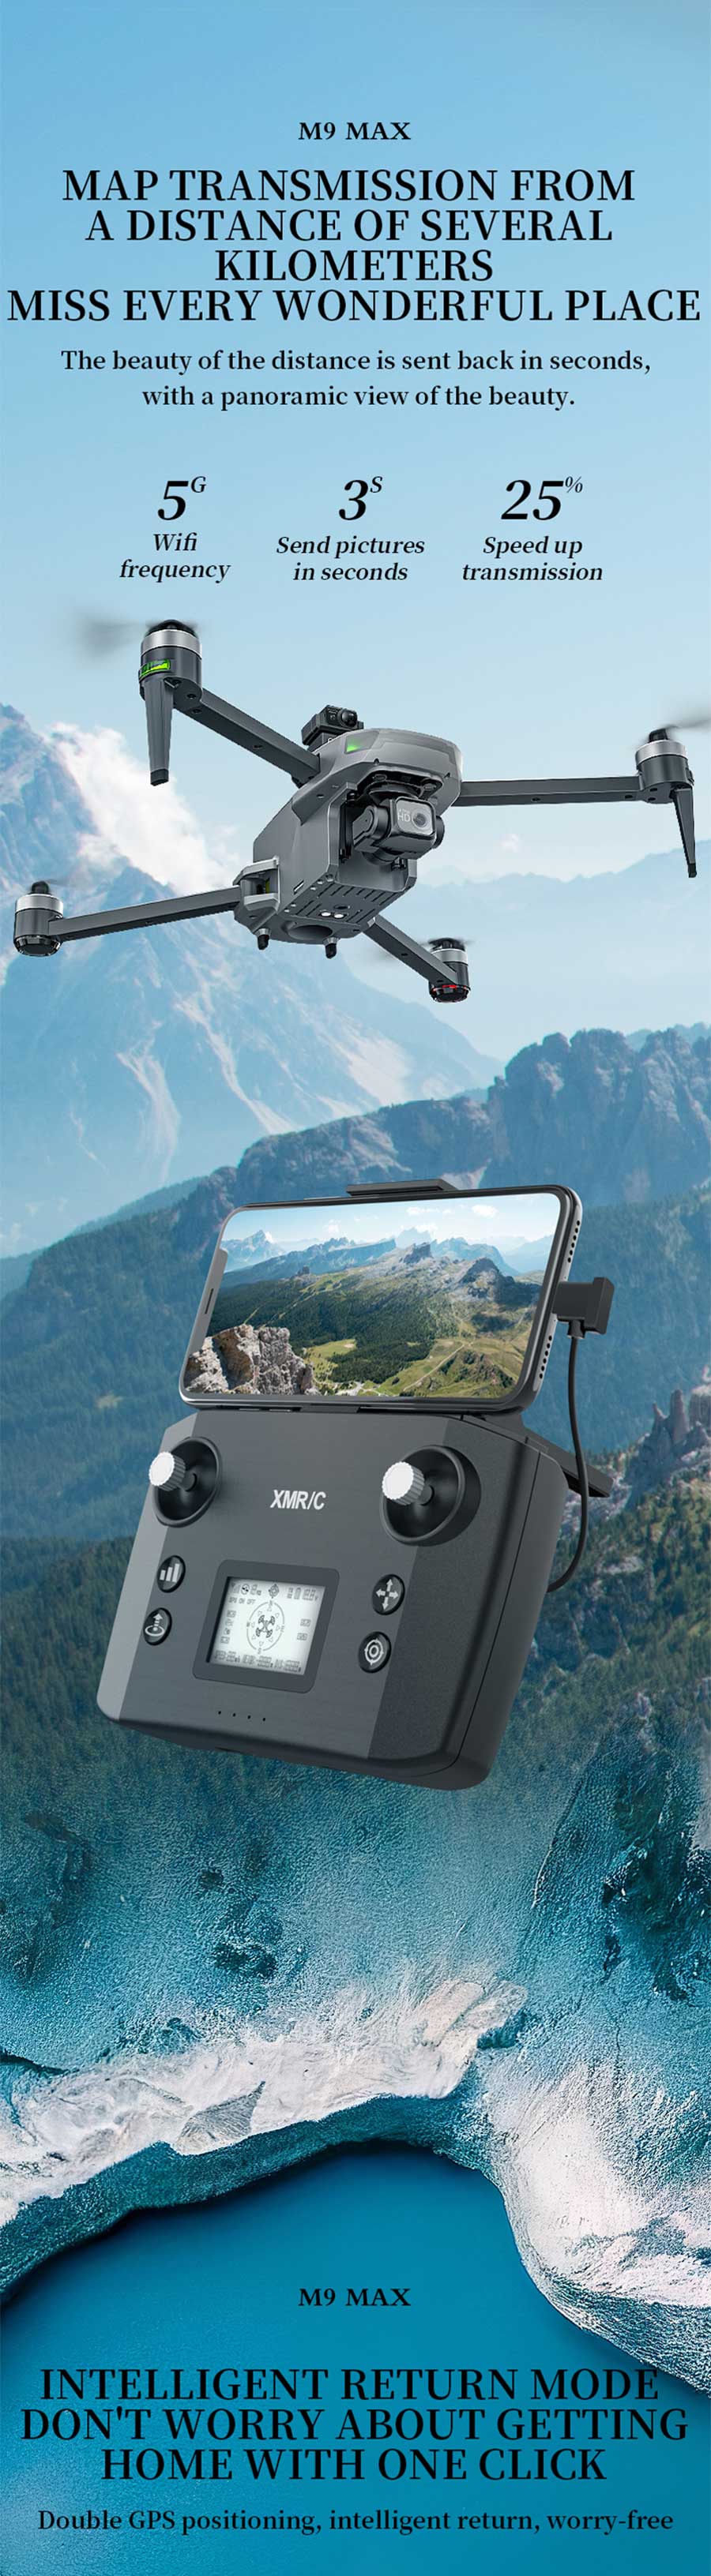 XMR/C M9 MAX Drone, M9 MAX MAP TRANSMISSION FROM A DISTANCE OF SEVERAL